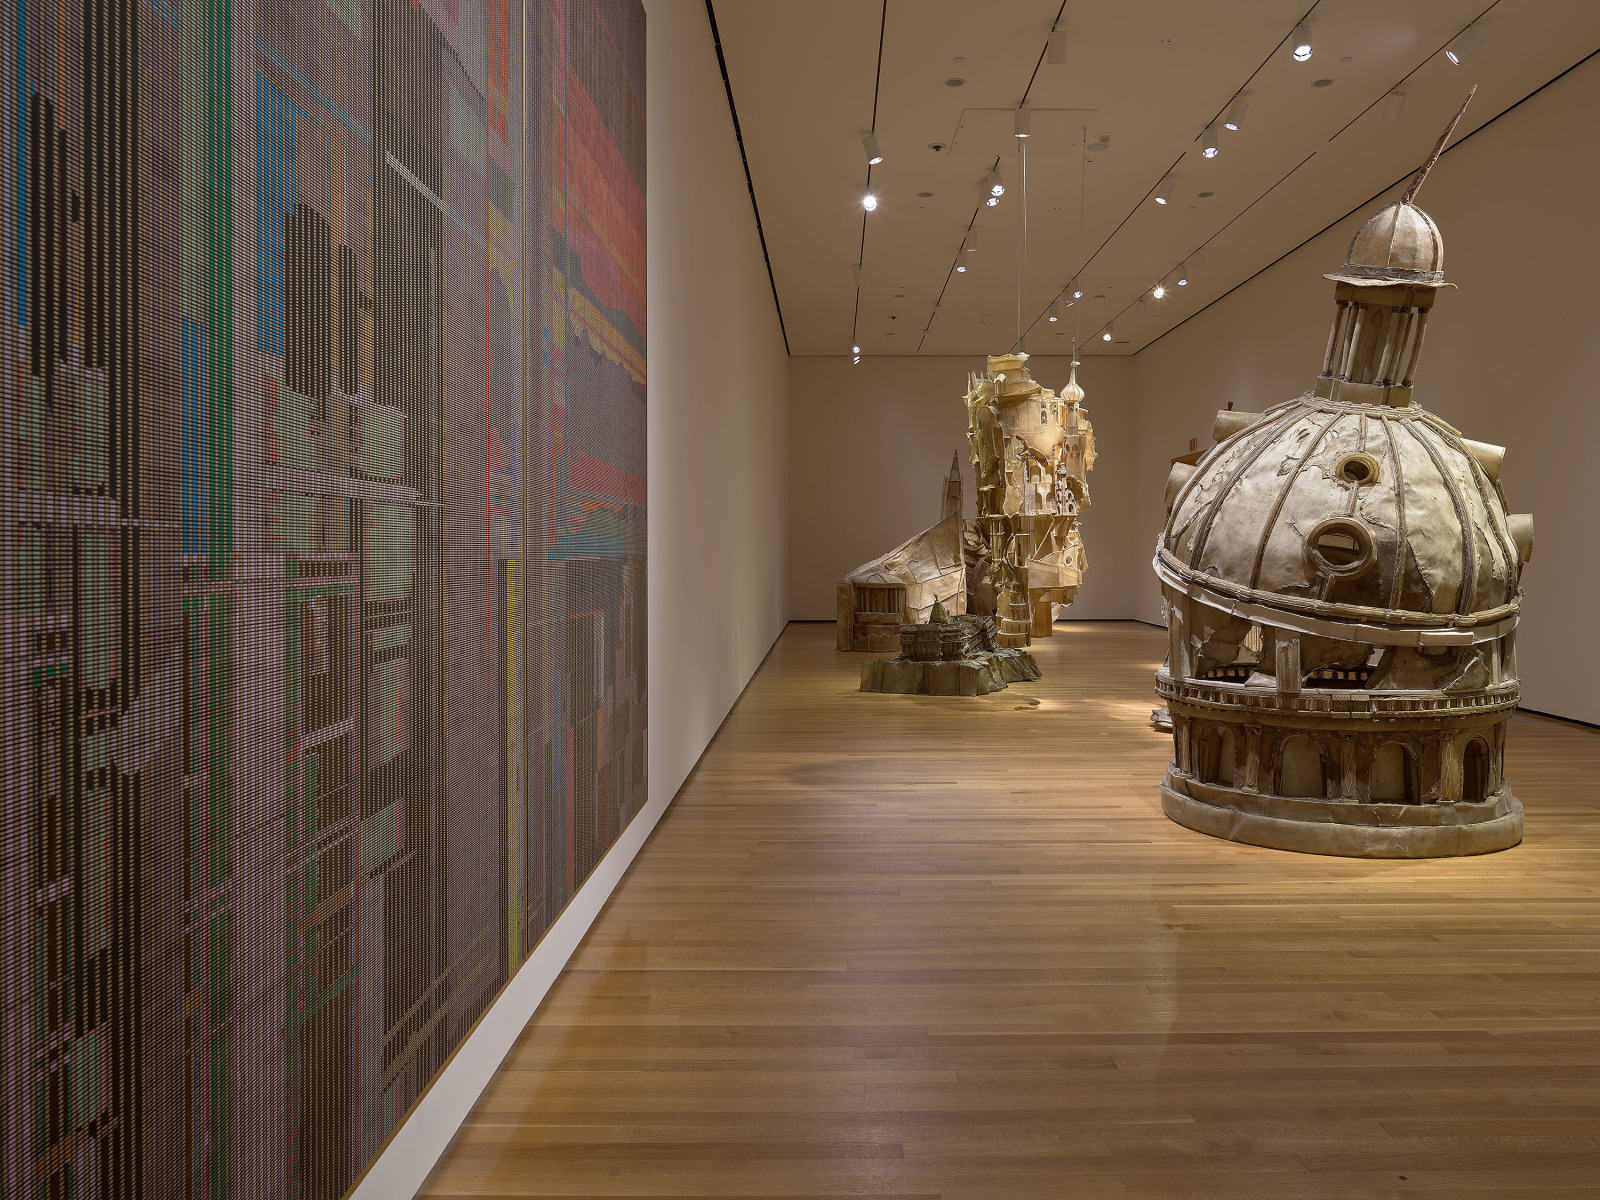 View 5 of Liu Wei's solo museum exhibition titled Invisible Cities at the Cleveland Museum of Art